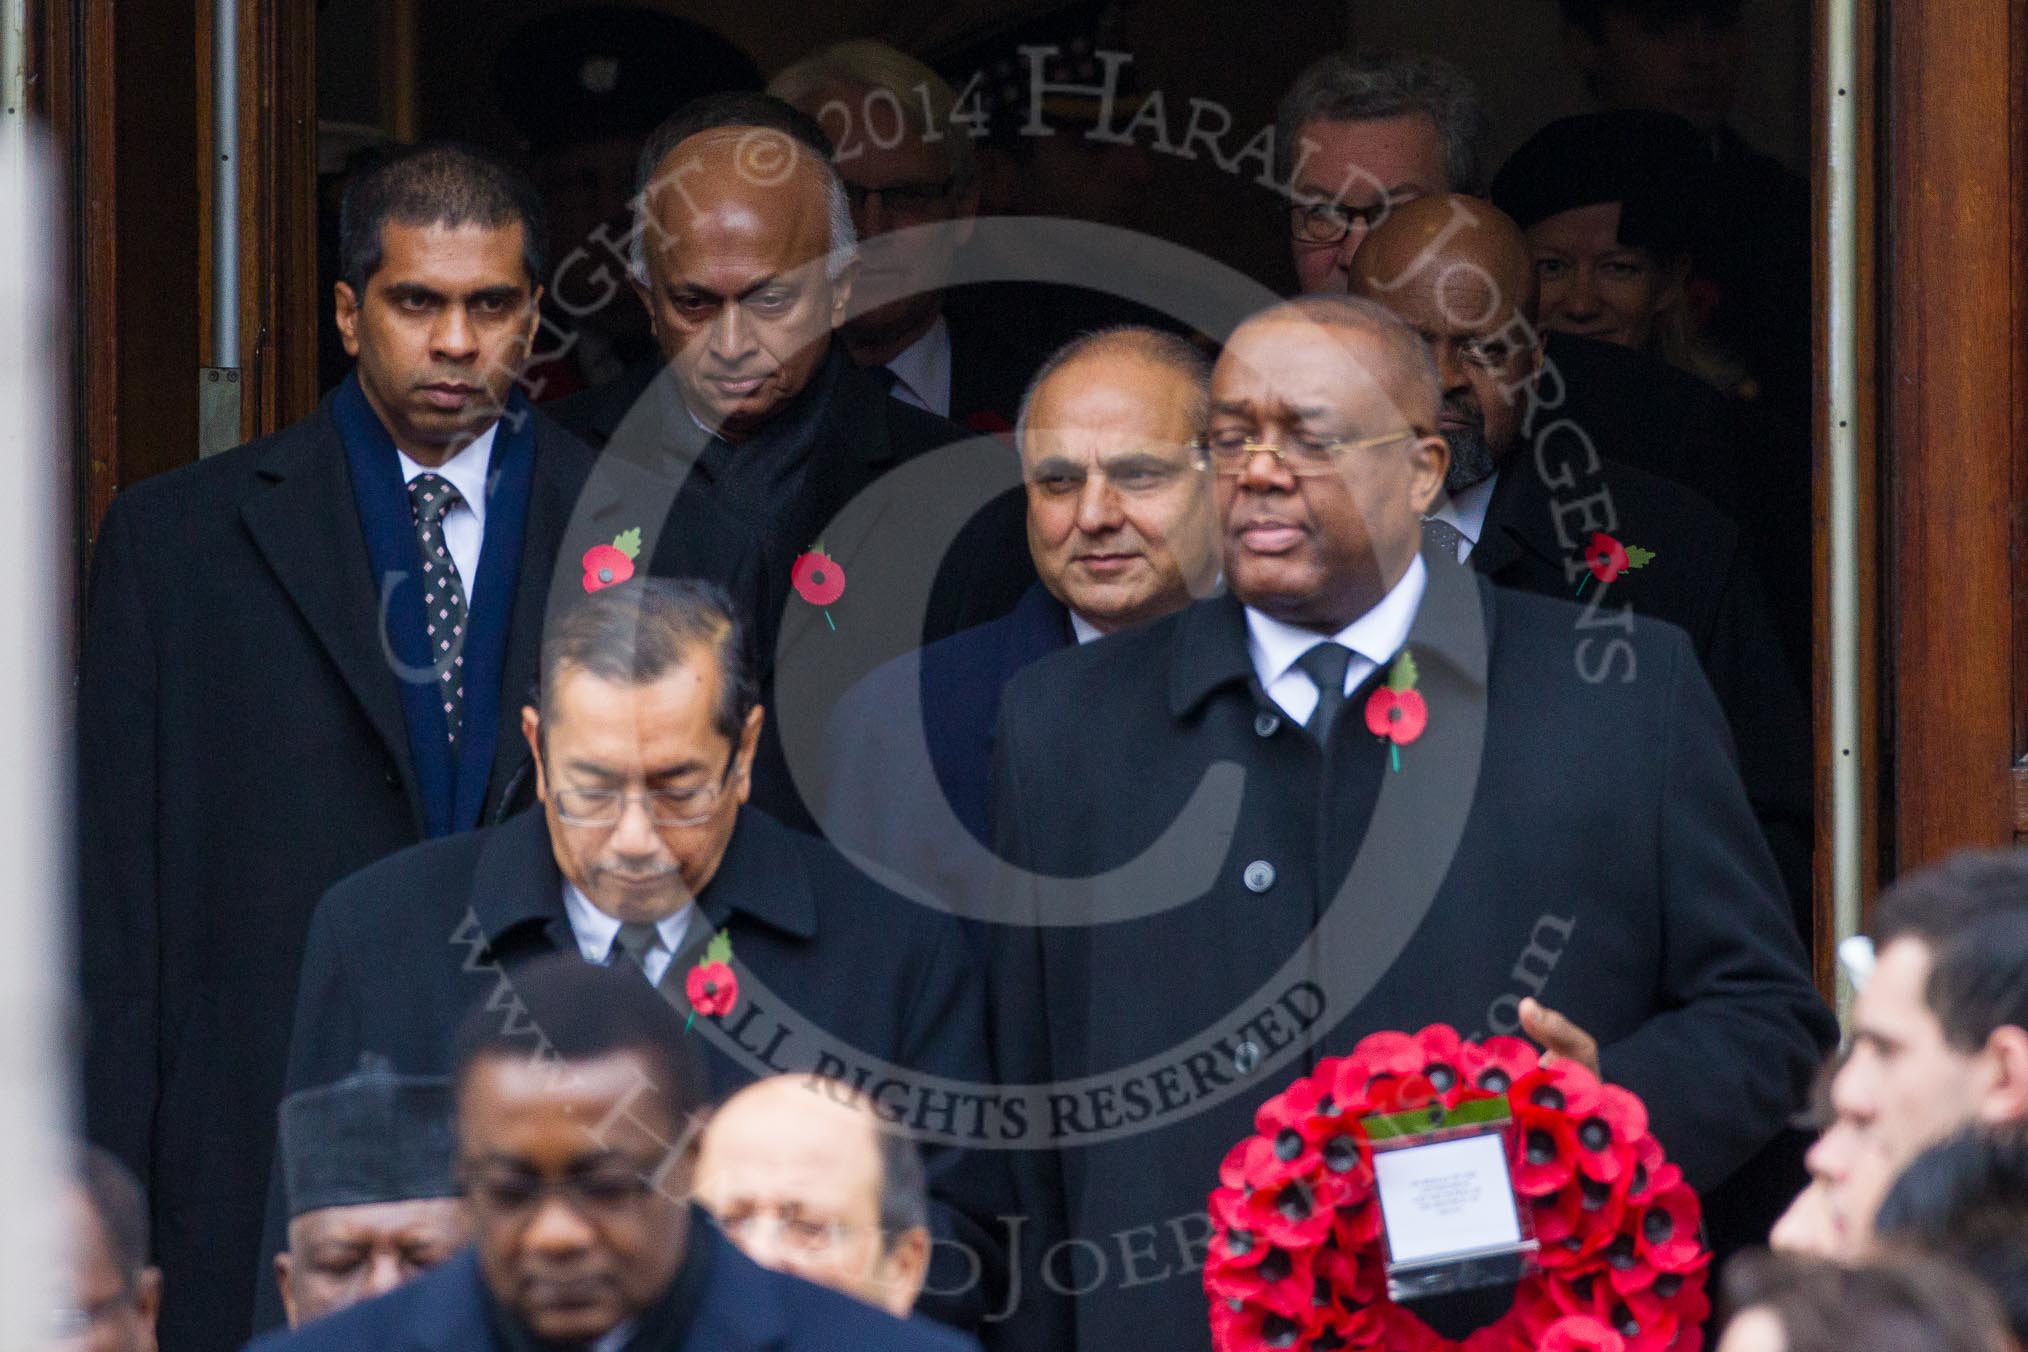 Remembrance Sunday at the Cenotaph in London 2014: The High Commissioners emerging from the door of the Foreign- and Commonwealth Office.
Press stand opposite the Foreign Office building, Whitehall, London SW1,
London,
Greater London,
United Kingdom,
on 09 November 2014 at 10:56, image #135